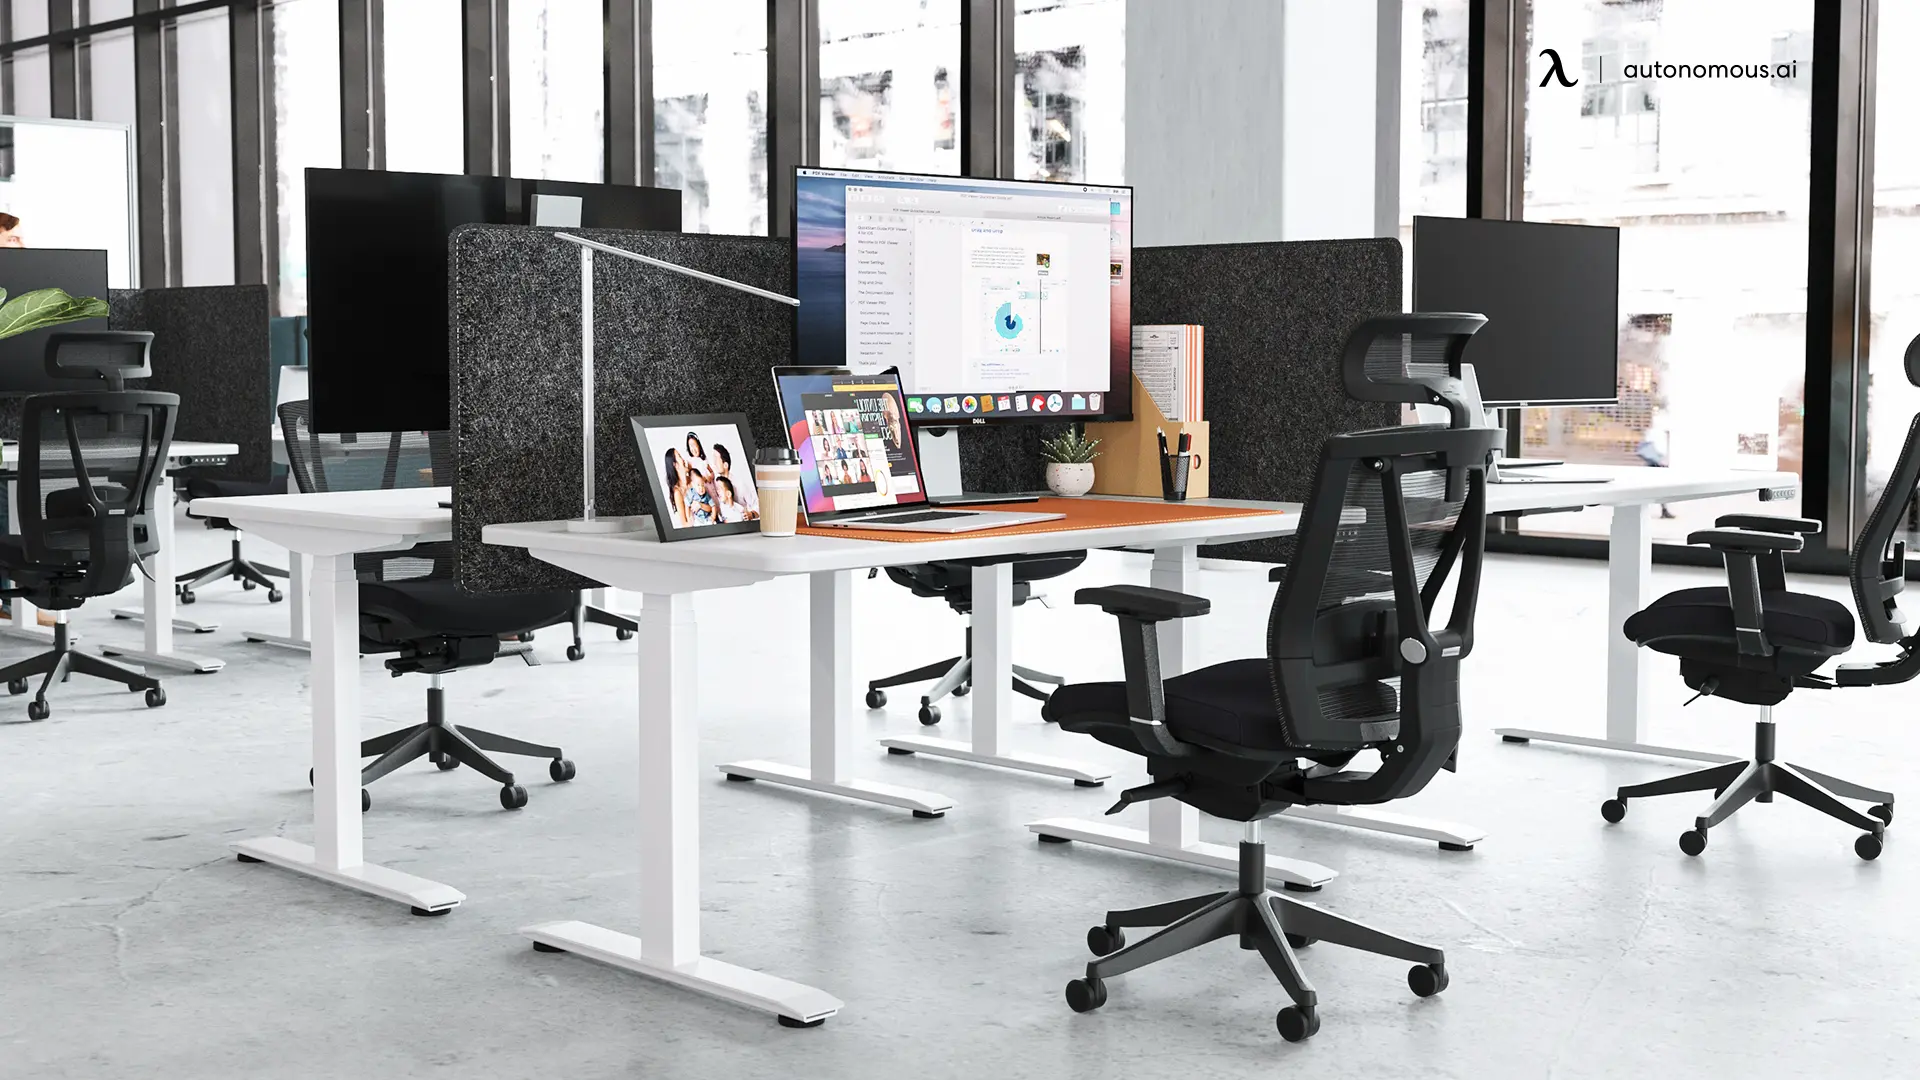 Select a Dominant Style to Accentuate Your Workspace's Overall Shape